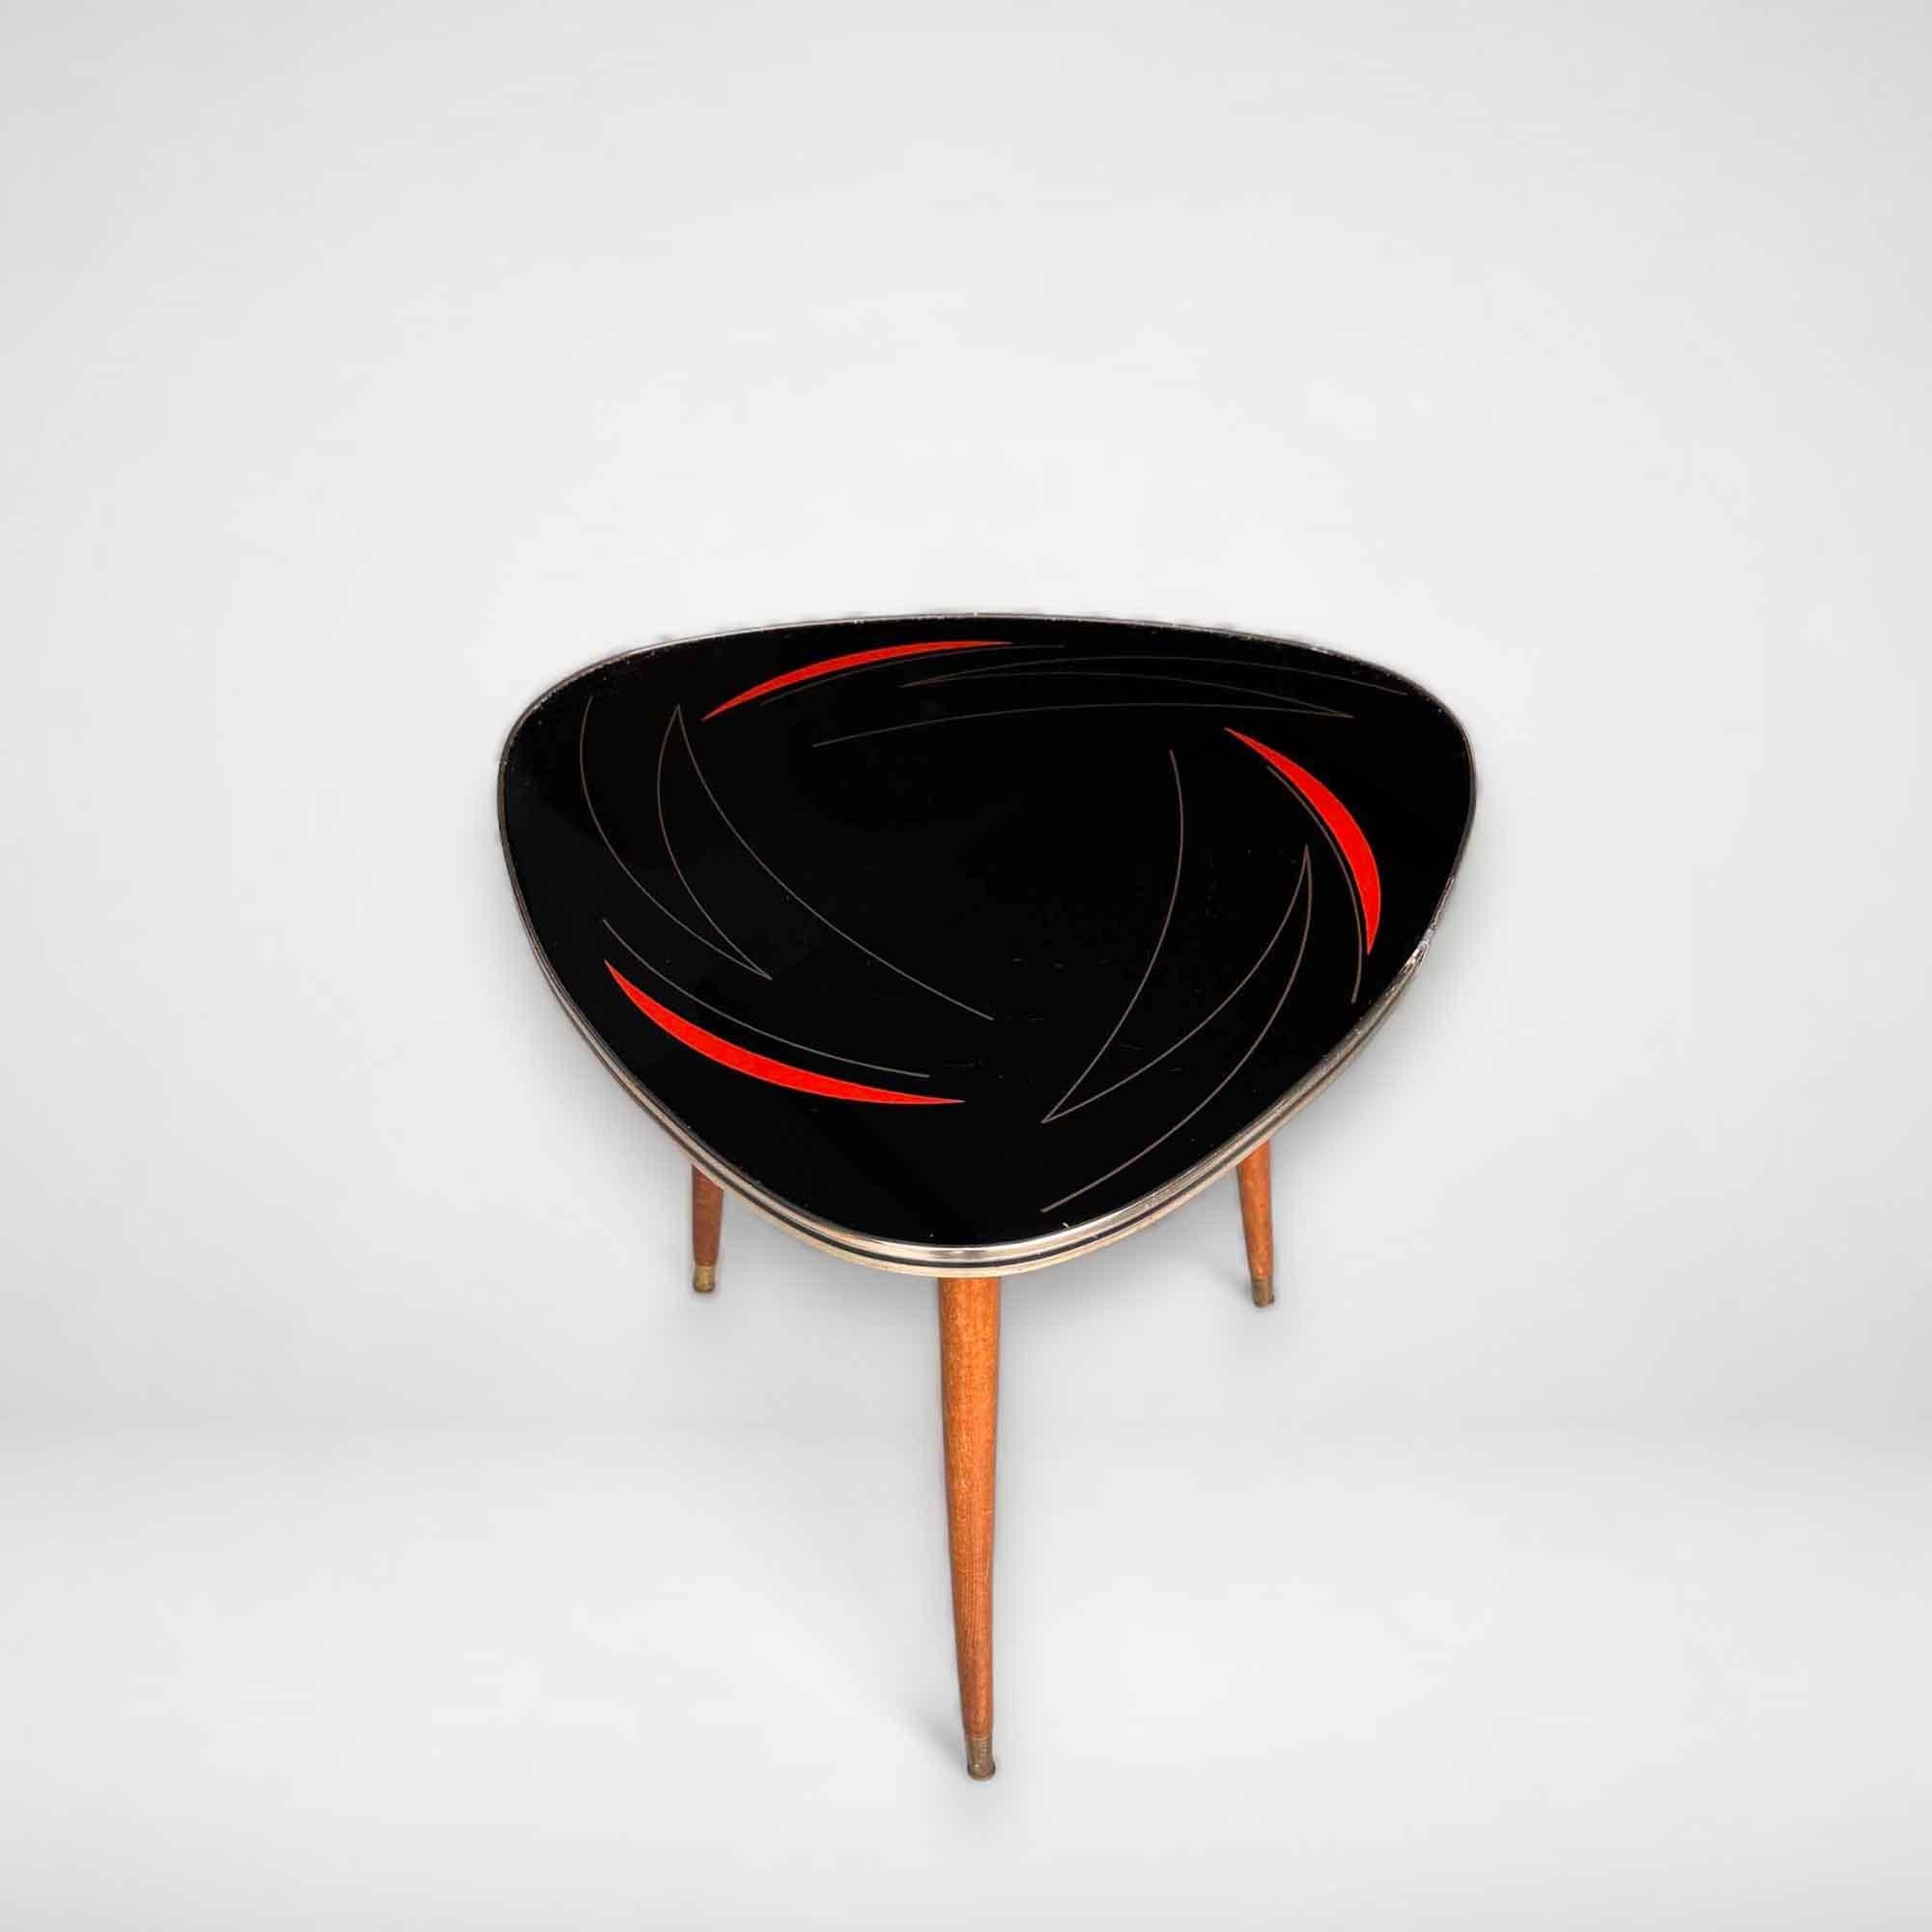 A beautiful fifties coffee table with an illustration in gold and red on a black background. This vintage table has the typical gold edge and stands on 3 sturdy wooden legs. The legs can be turned out. The style of this side table is also called